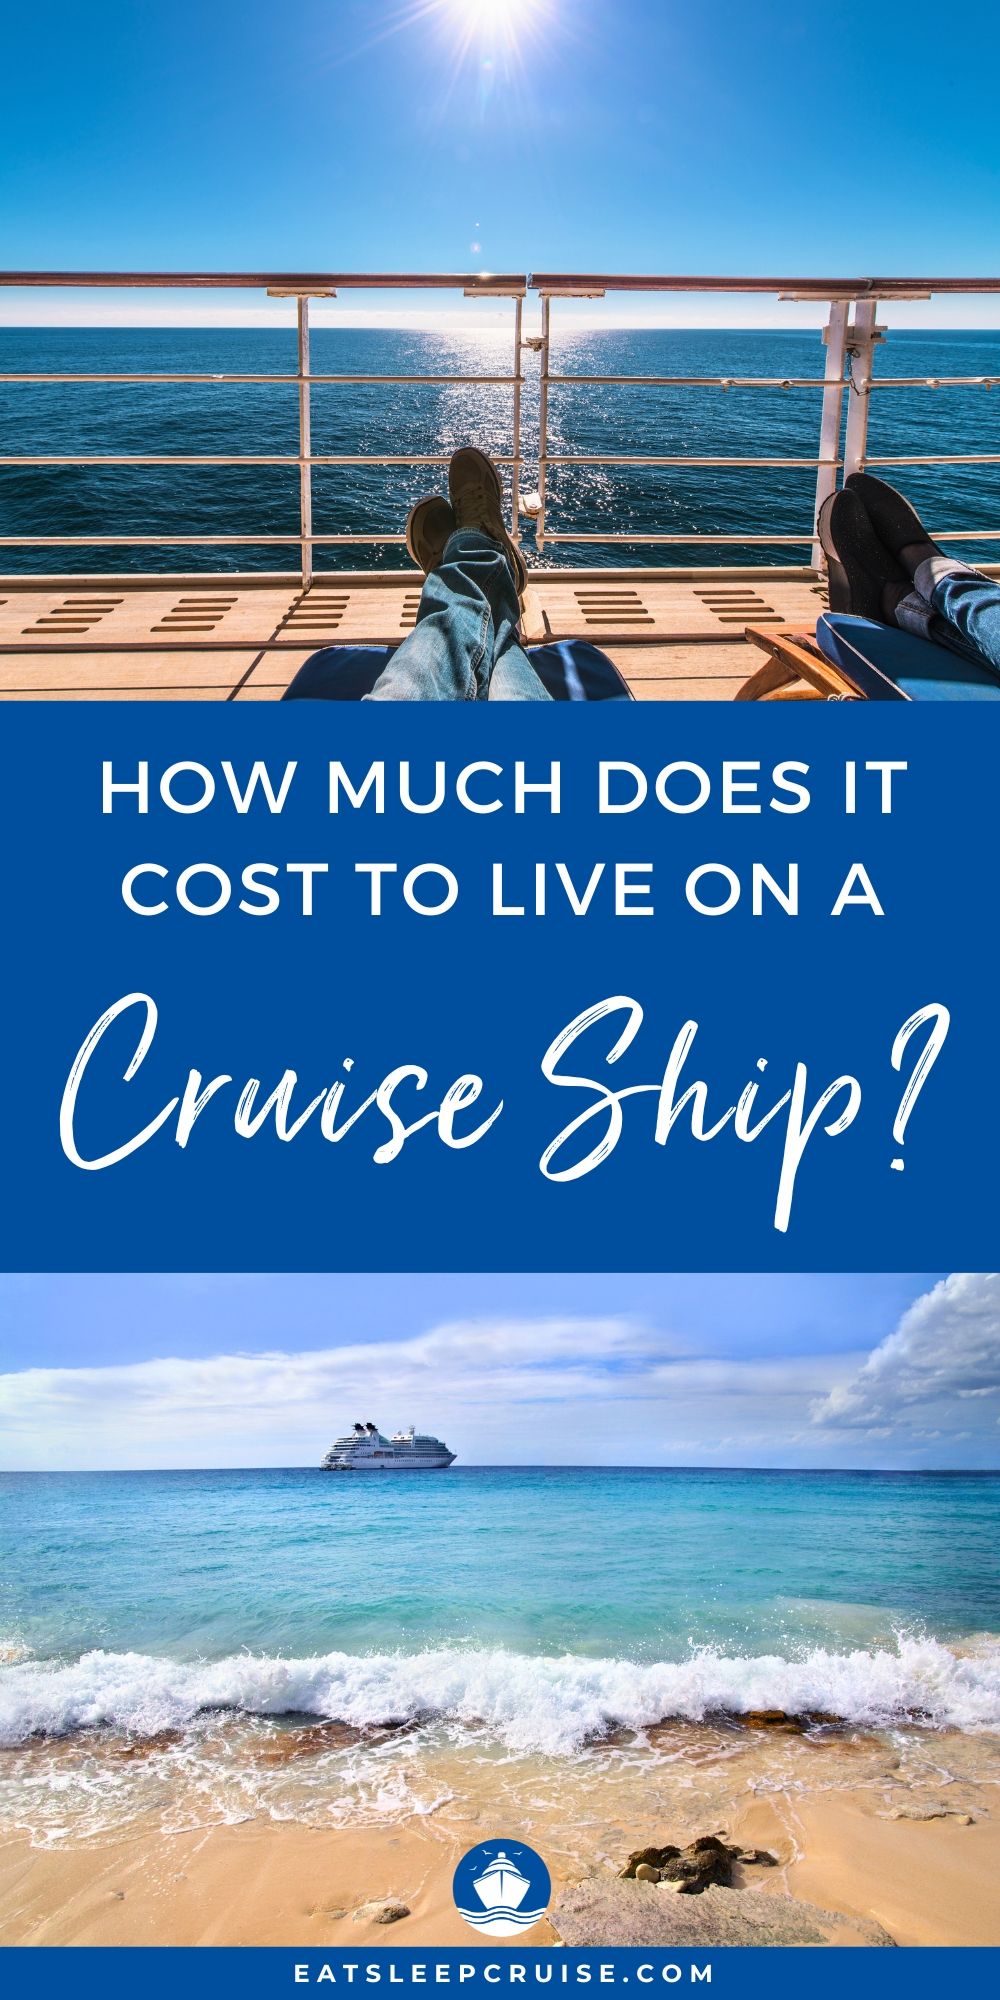 How much does it cost to live on a cruise ship